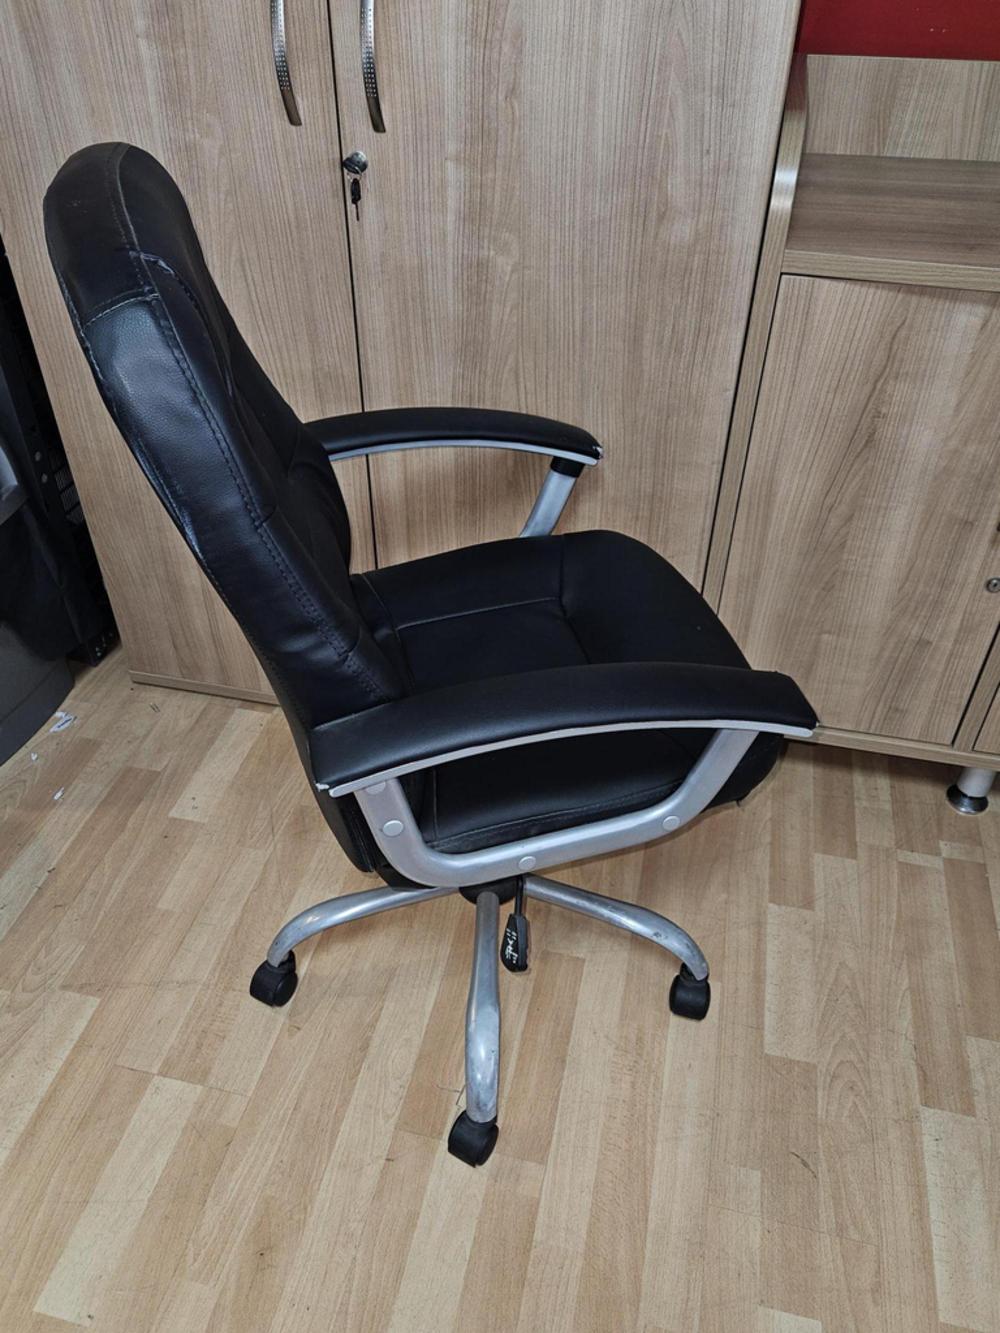 Black Leather Chair With Fixed Arms Slight Damage To The Corners On Arms